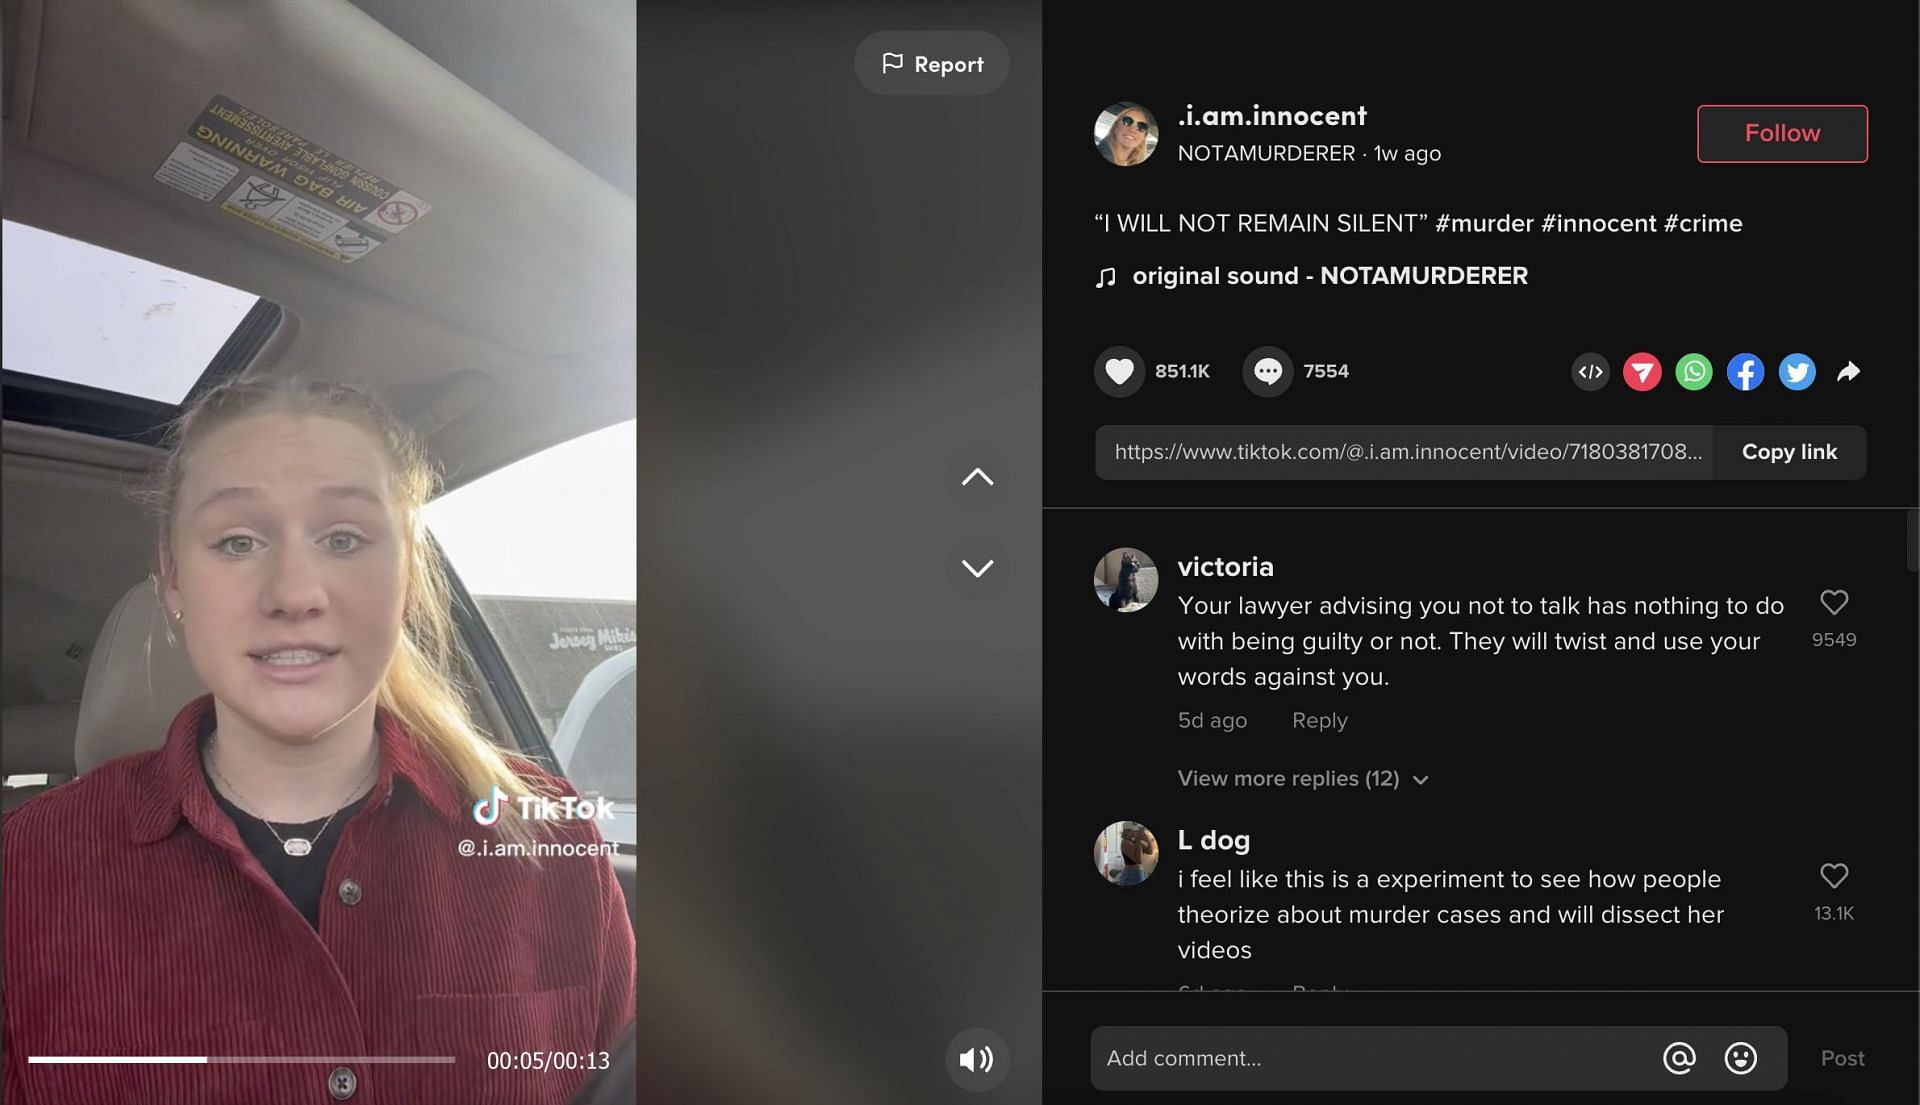 Videos uploaded by them both leave people perplexed, and they cannot understand as to which case is the duo talking about. (Image via TikTok)